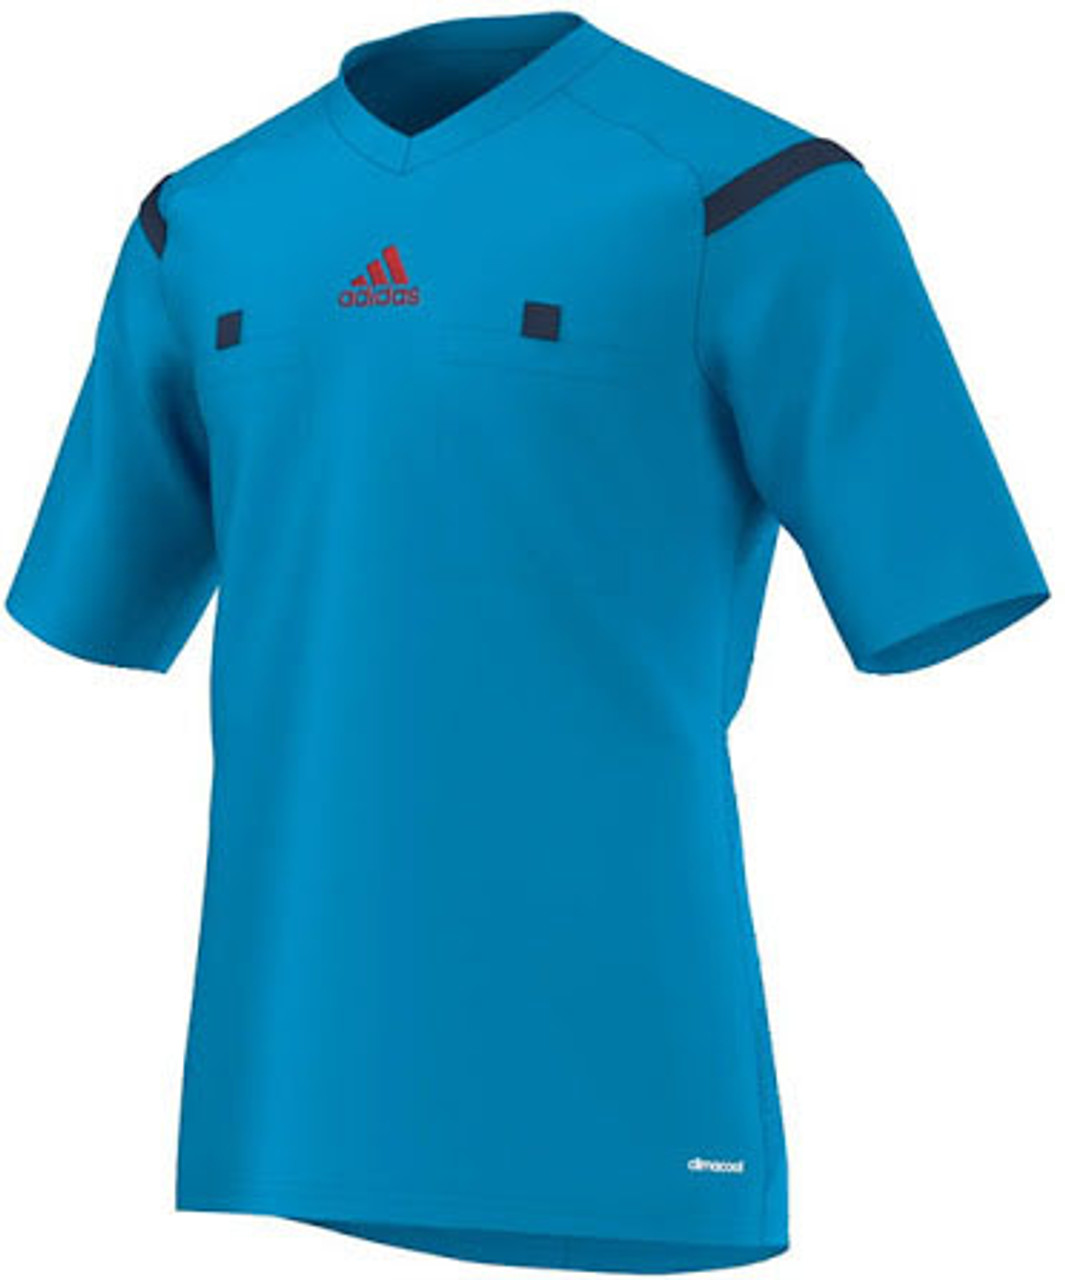 ADIDAS REFEREE WORLD CUP JERSEY BLUE - Soccer Plus